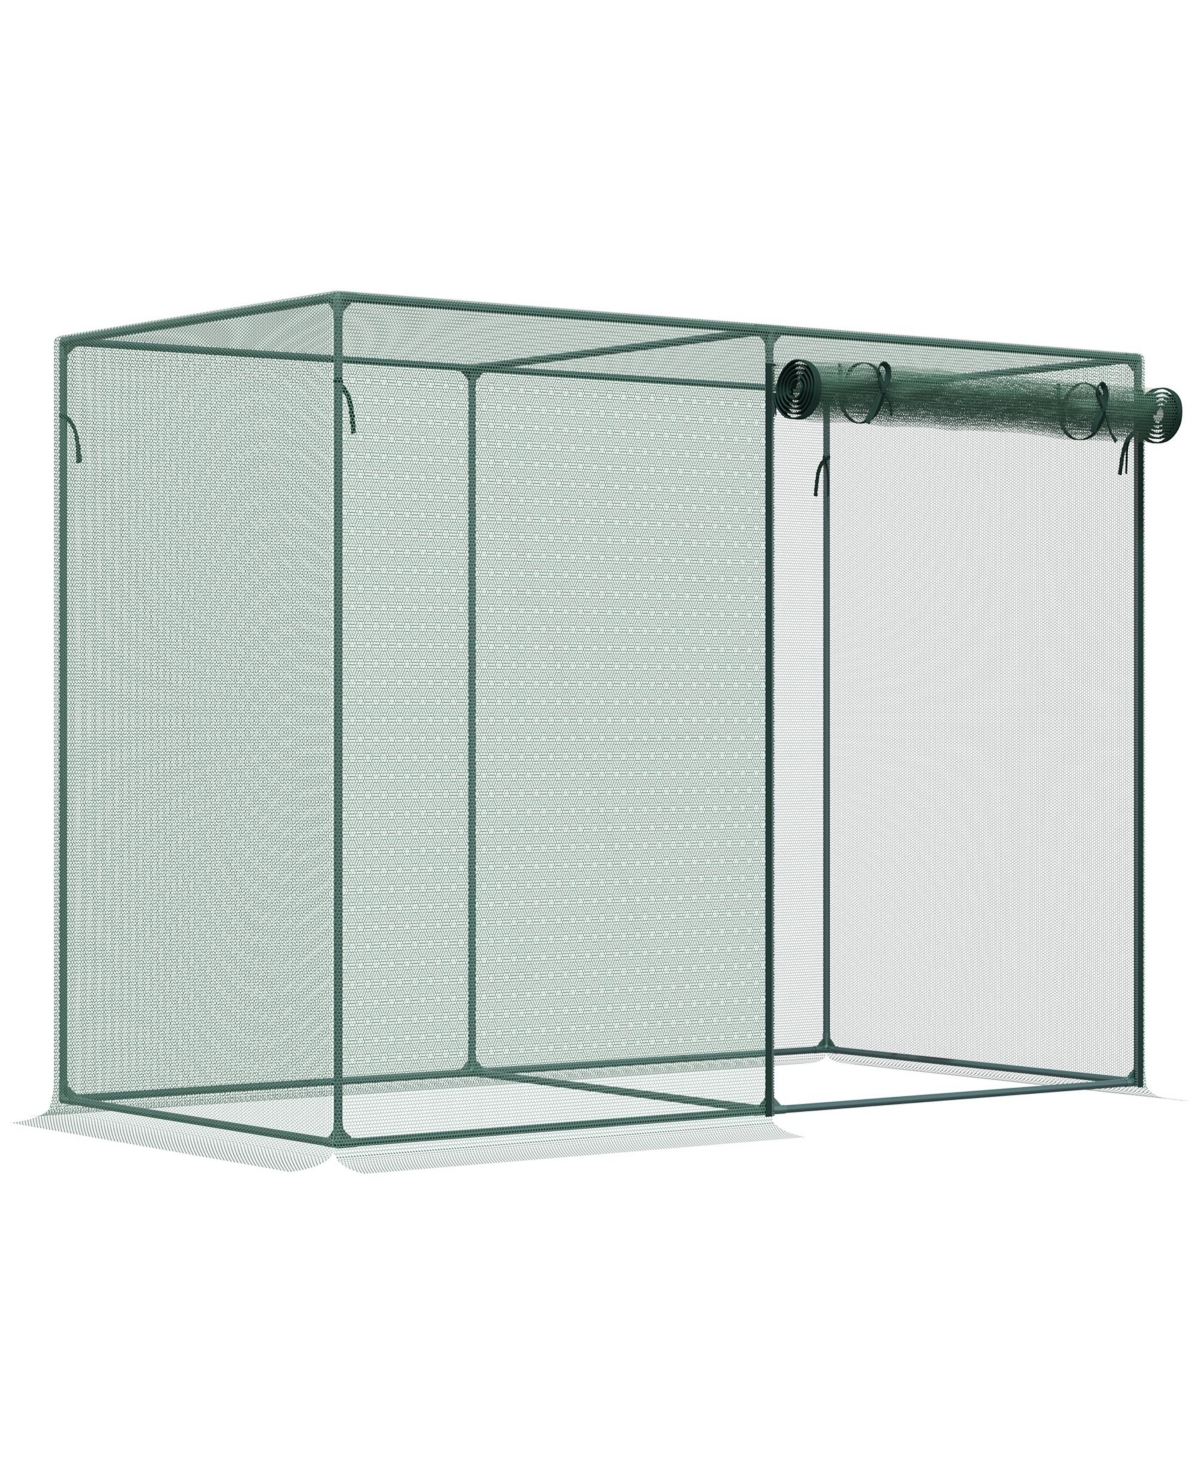 6' x 3' Tall Crop Cage with Two Zippered Doors, Plant Protection Tent with Storage Bag and 6 Ground Stakes for Garden, Yard, Green - Green